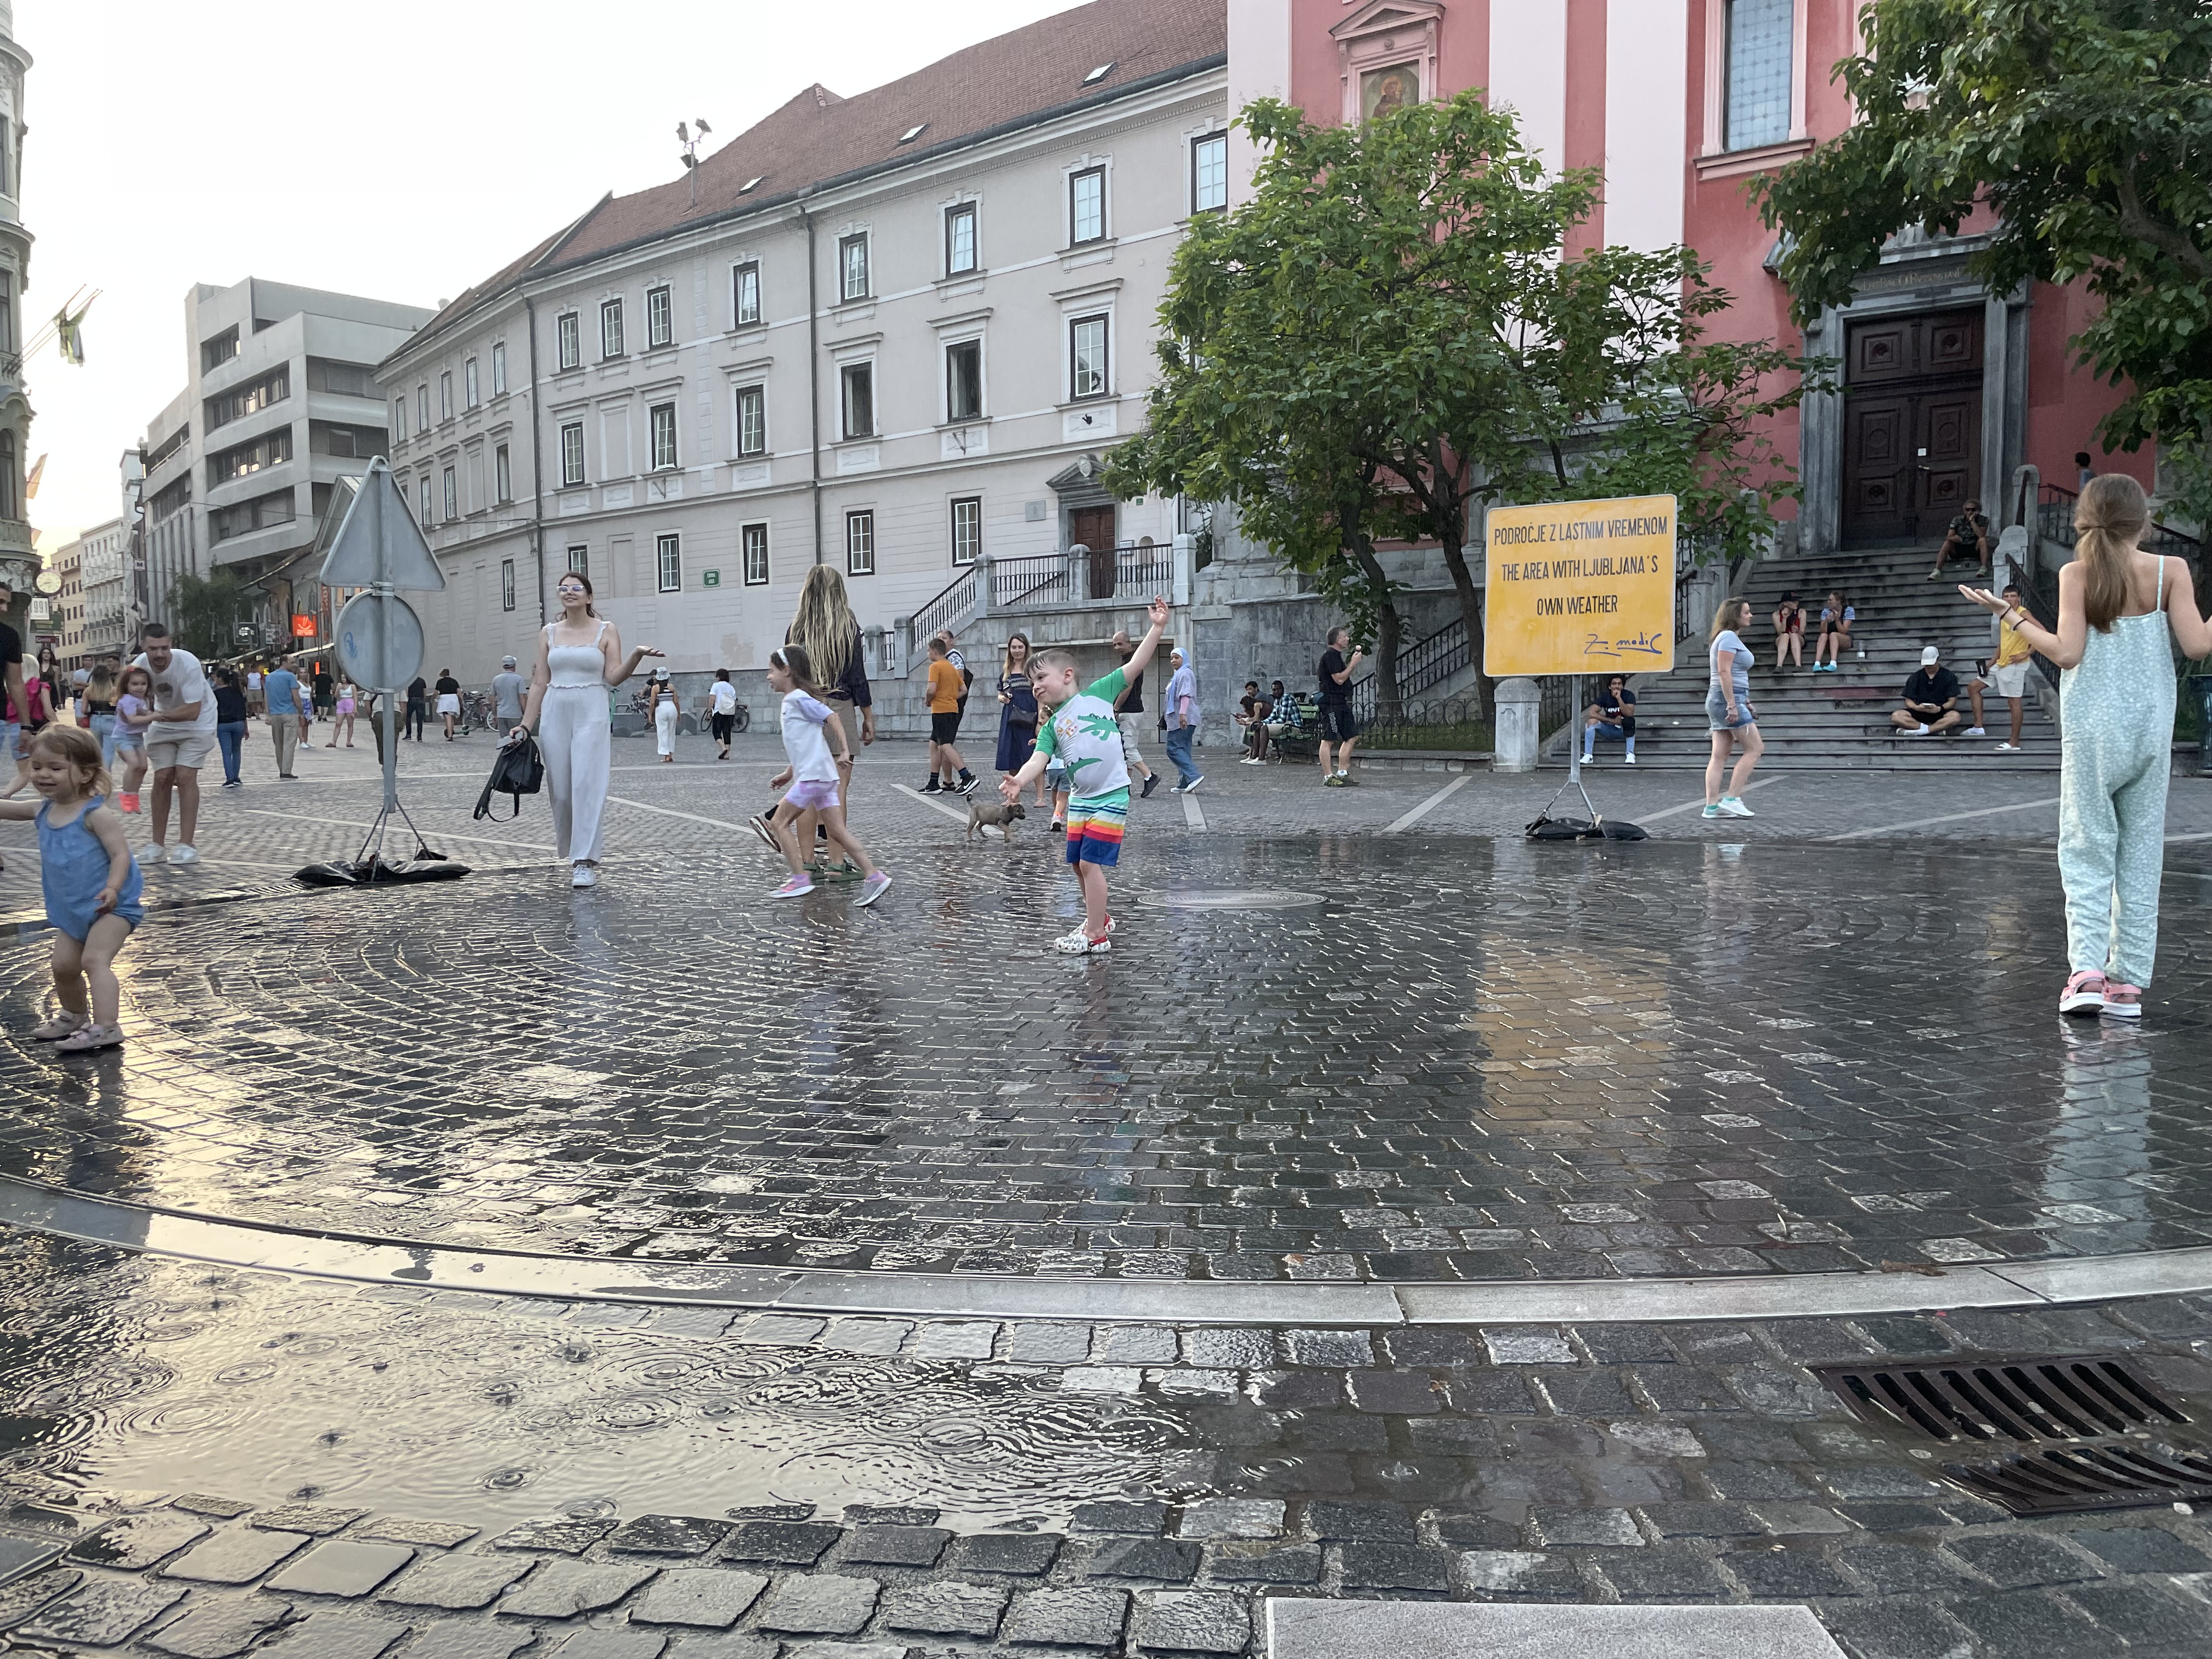 A group of people playing in an apparent rain shower in a pedestrian square. László is centered with his arms out.